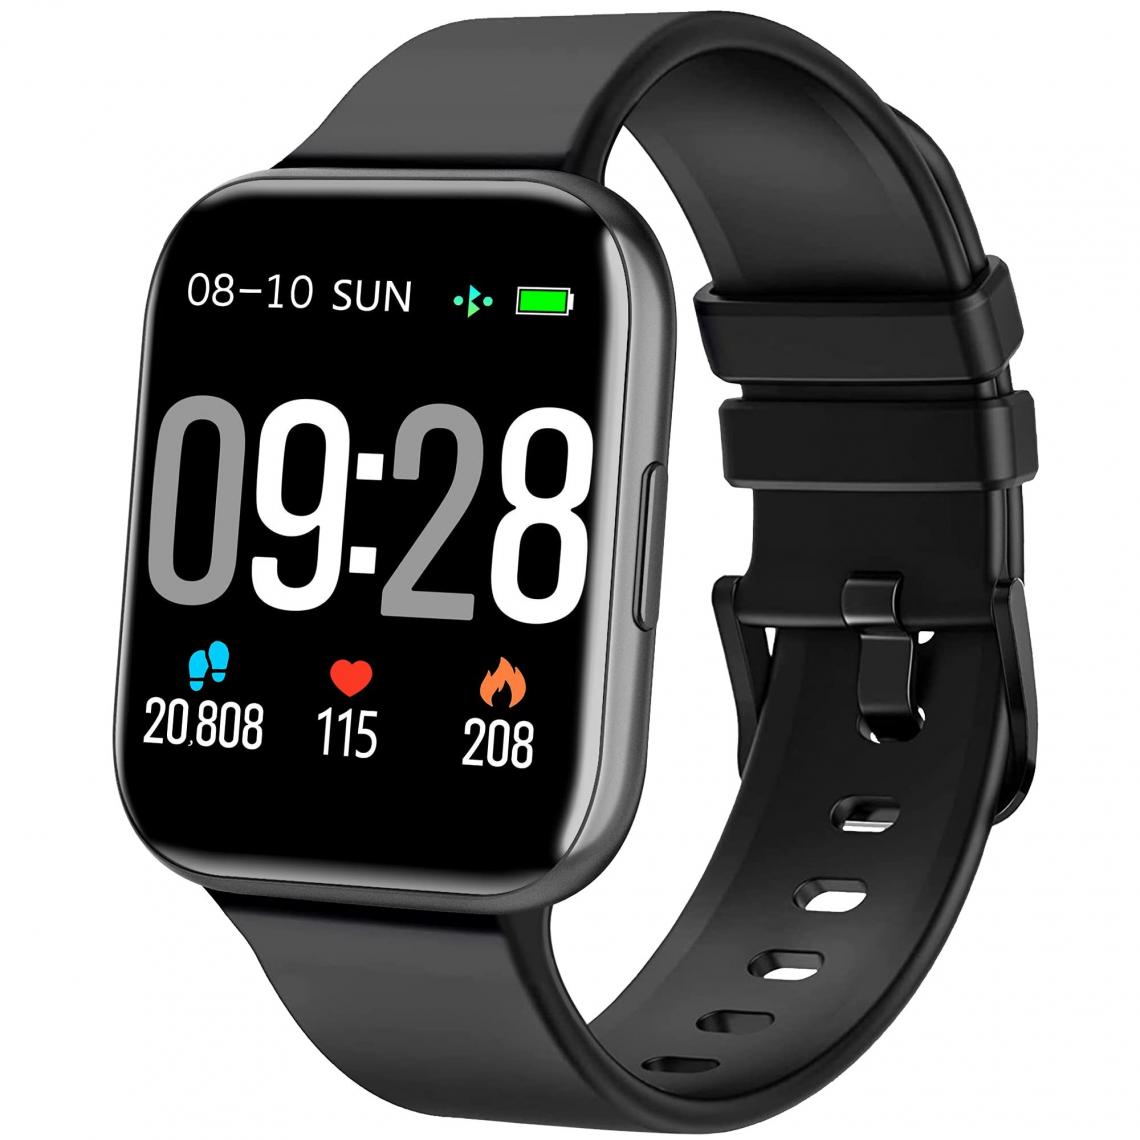 Chronotech Montres - Chronus Smart watch, 1.69" Bluetooth Talking Smartwatch for Android Phones and iOS Phones, IP68 Water Resistant Fitness Tracker with Heart Rate and Sleep Monitor (black) - Montre connectée